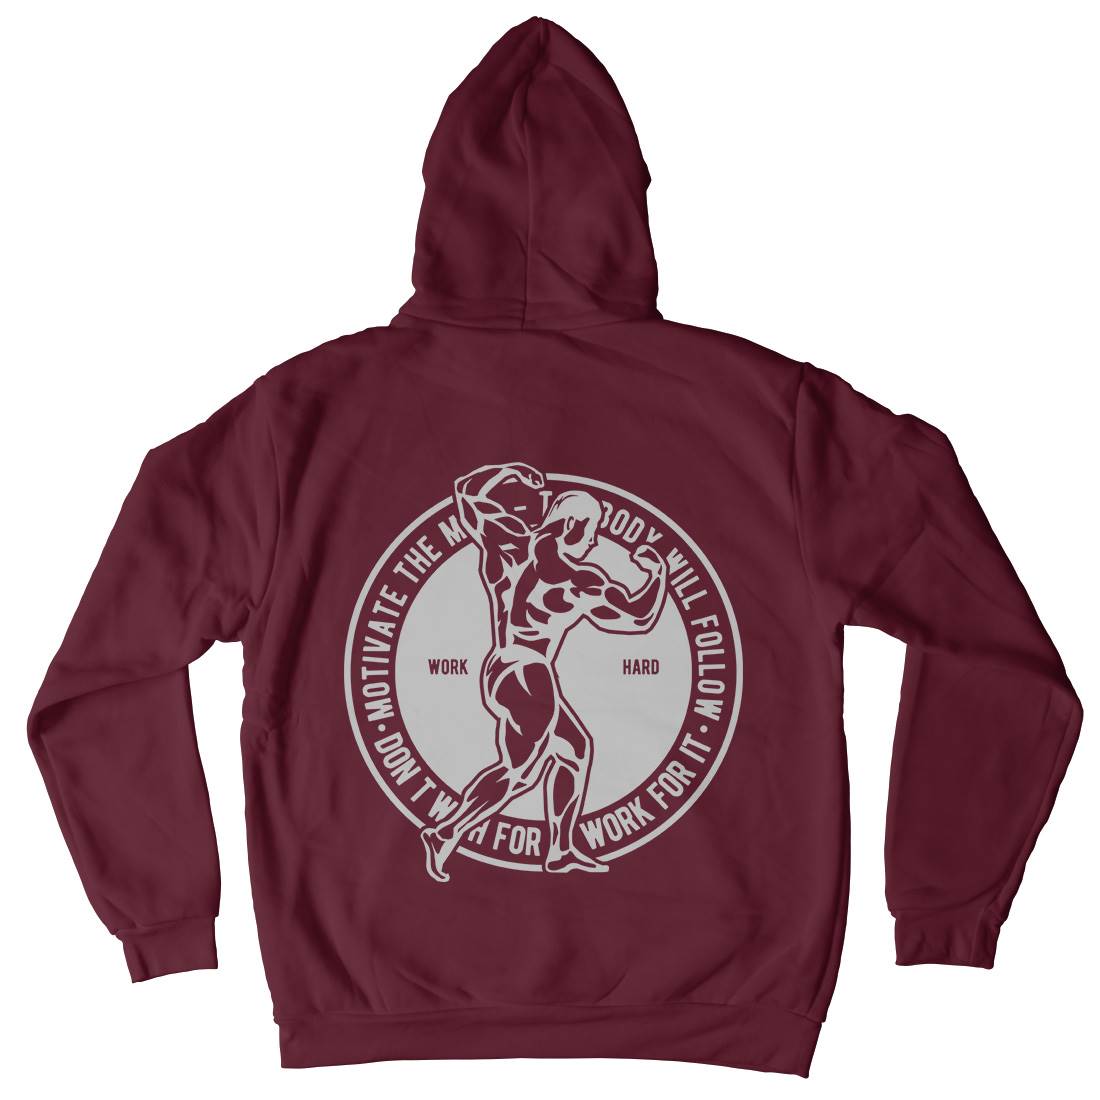 Motivate The Mind Kids Crew Neck Hoodie Gym A716